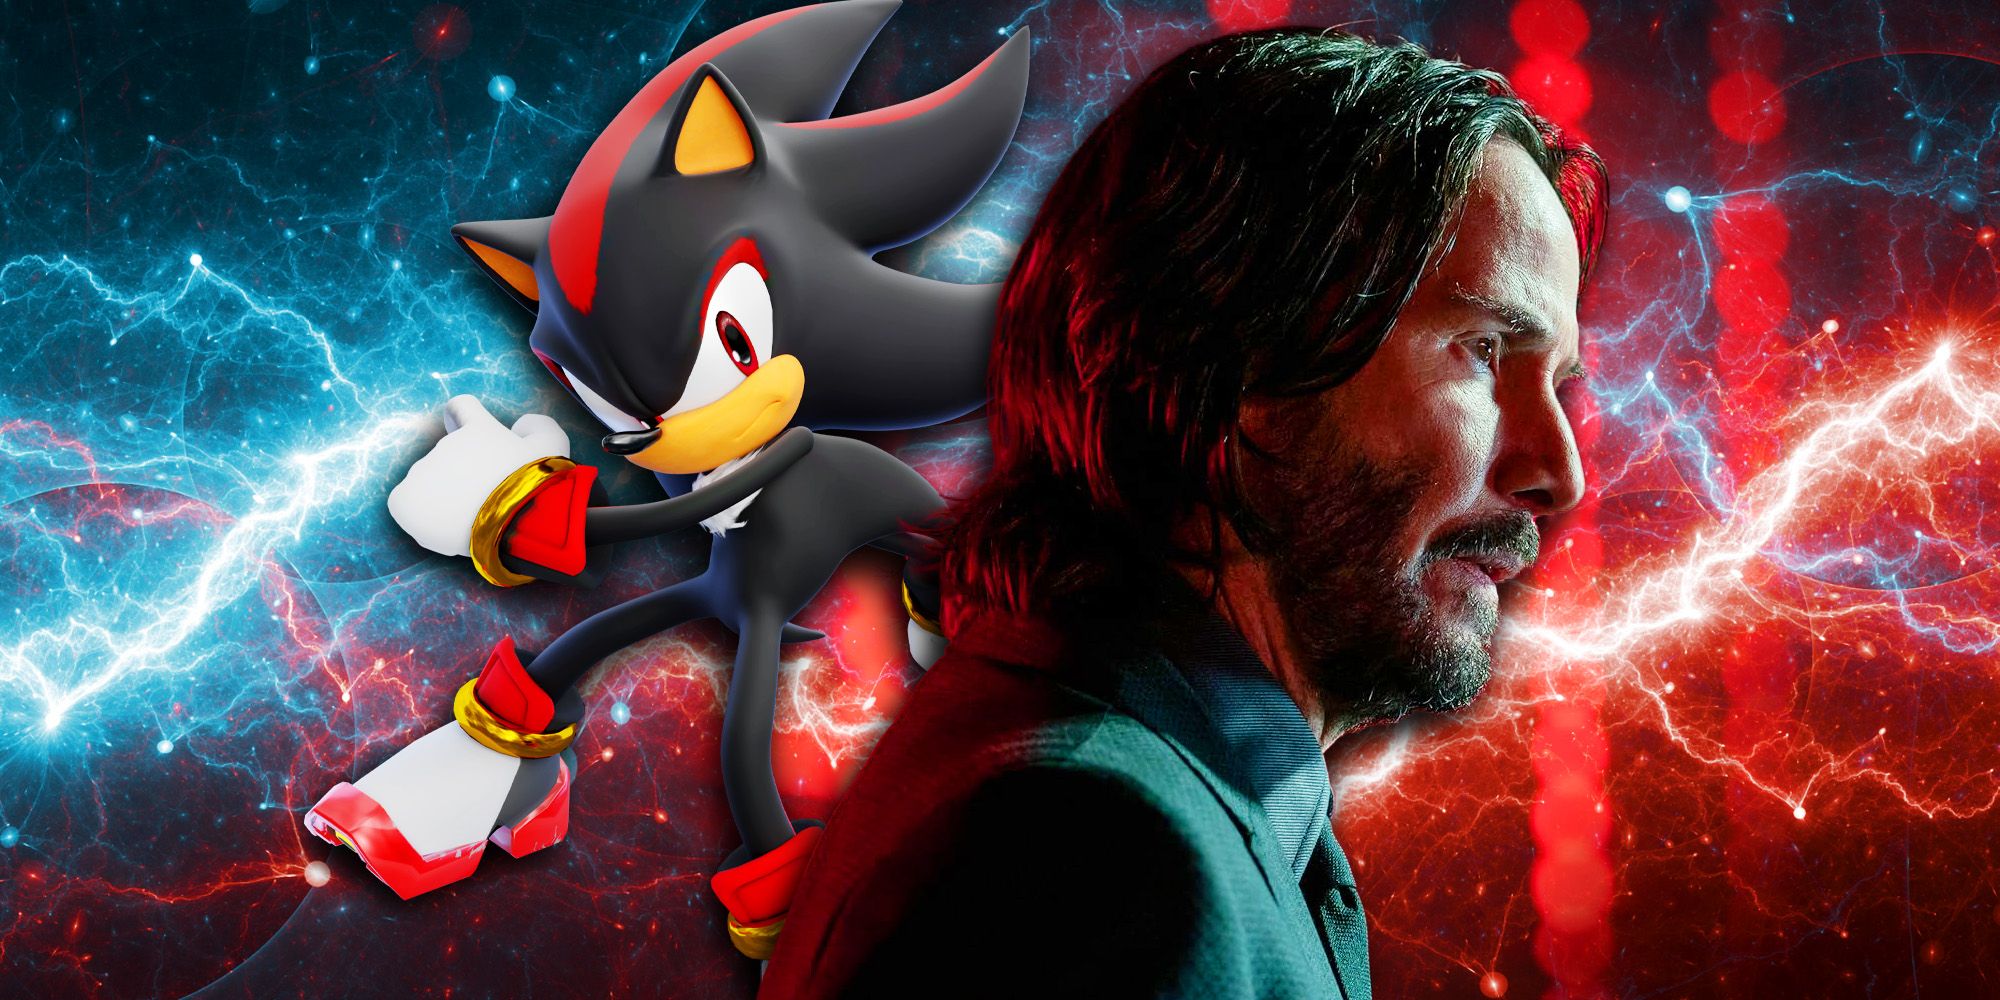 Keanu Reeves from John Wick 4 and Shadow from Sonic The Hedgehog